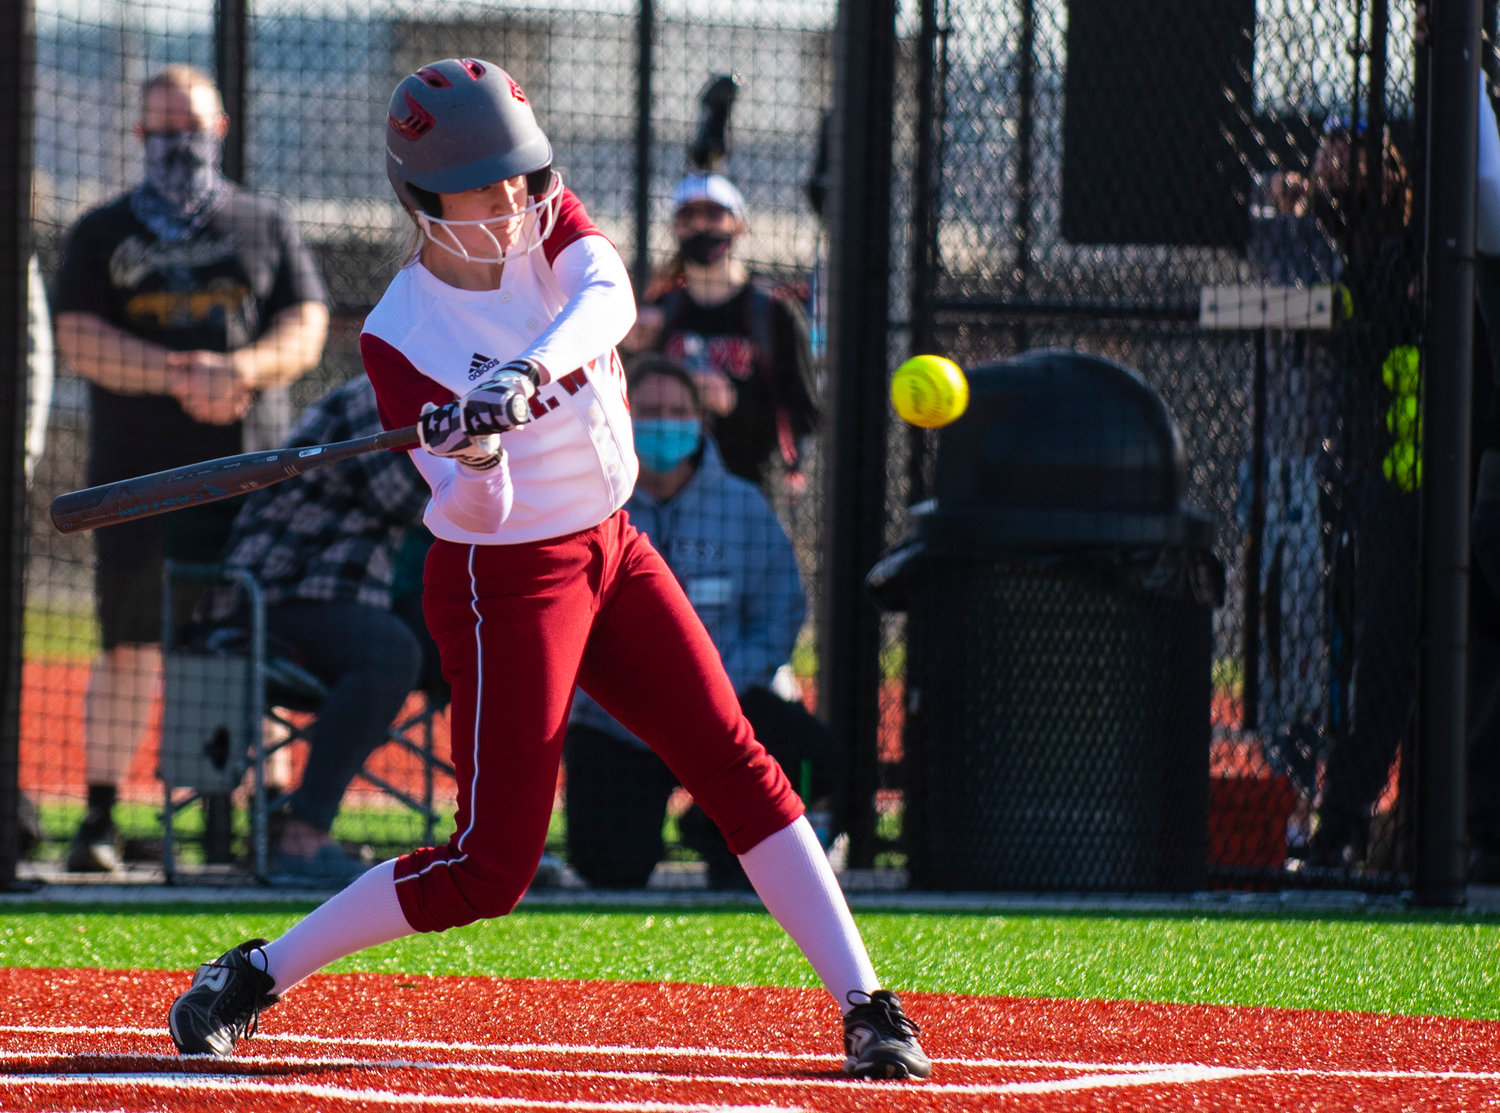 W.F. West sophomore Saige Brindle winds up for a swing against Rochester on Wednesday.